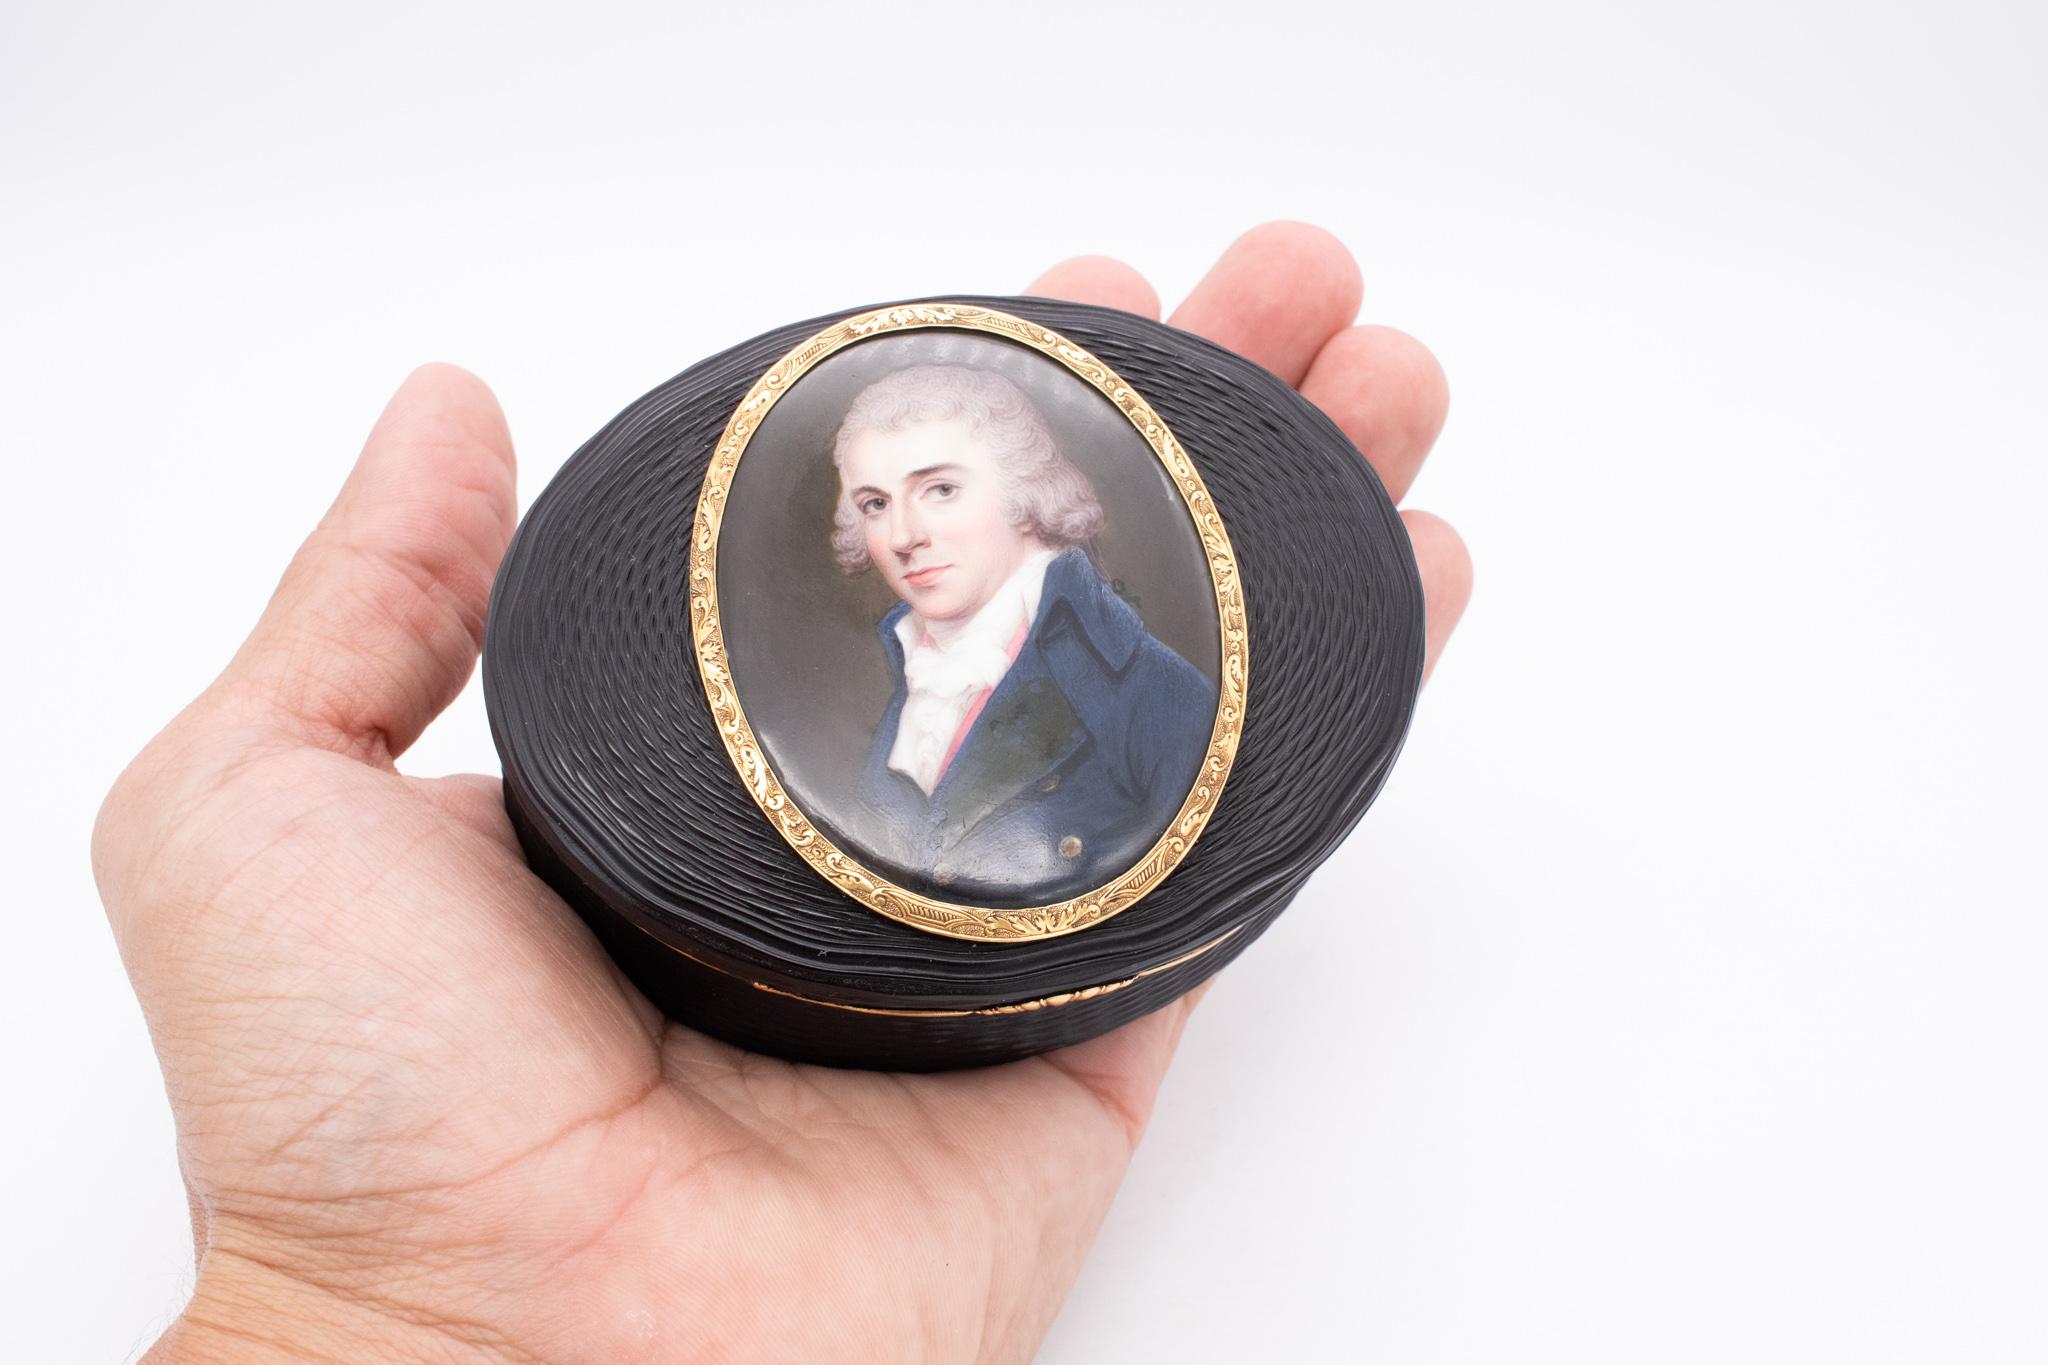 Neoclassical French School 1790 Louis XVI Oval Snuff Box in 18kt Gold with Miniature Portrait For Sale